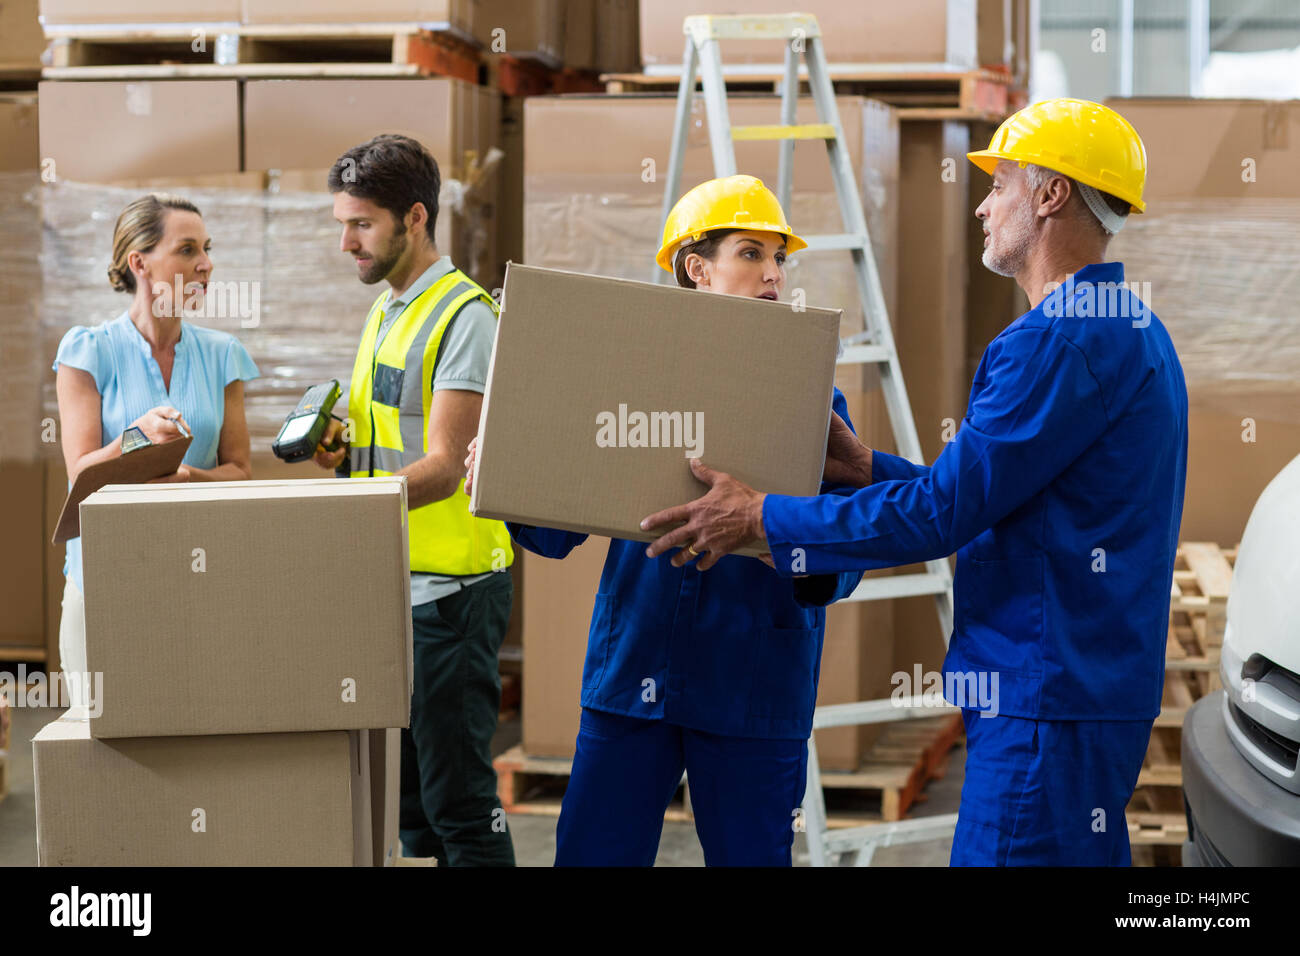 Delivery worker unloading cardboard boxes from pallet jack Stock Photo